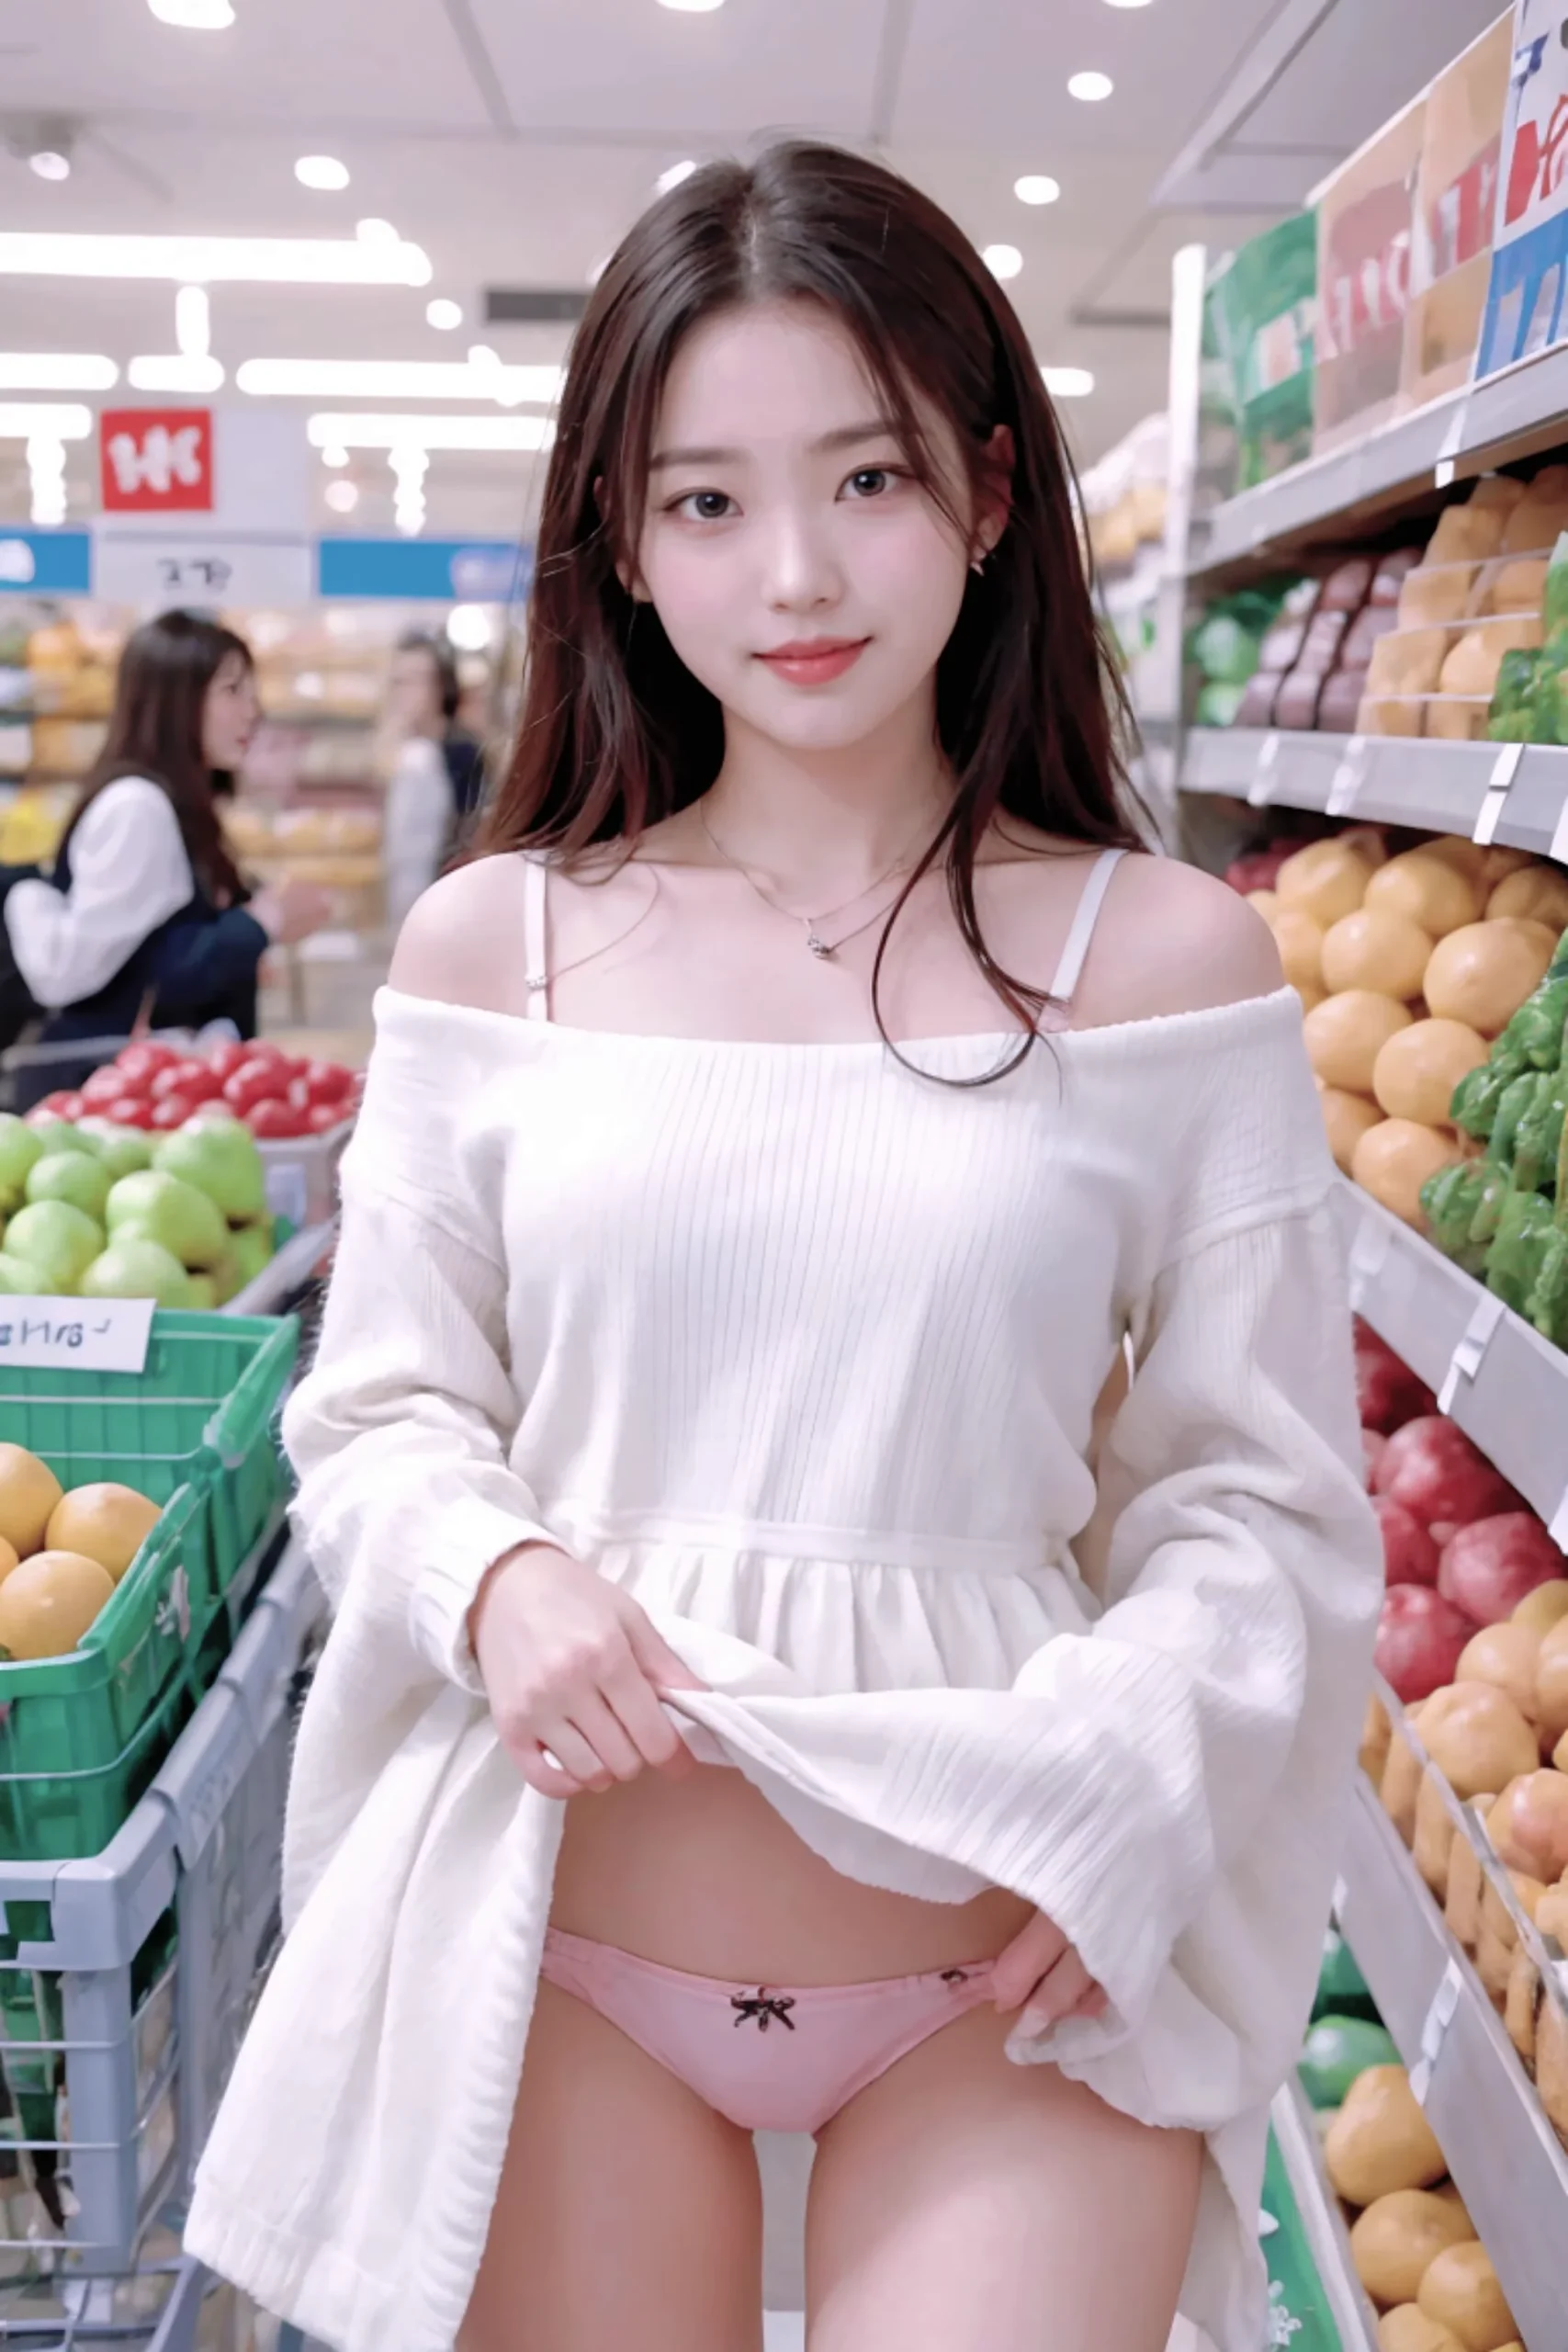 View - Young Lady Flashing Panties In A Store Images - Ai Art Lookbook